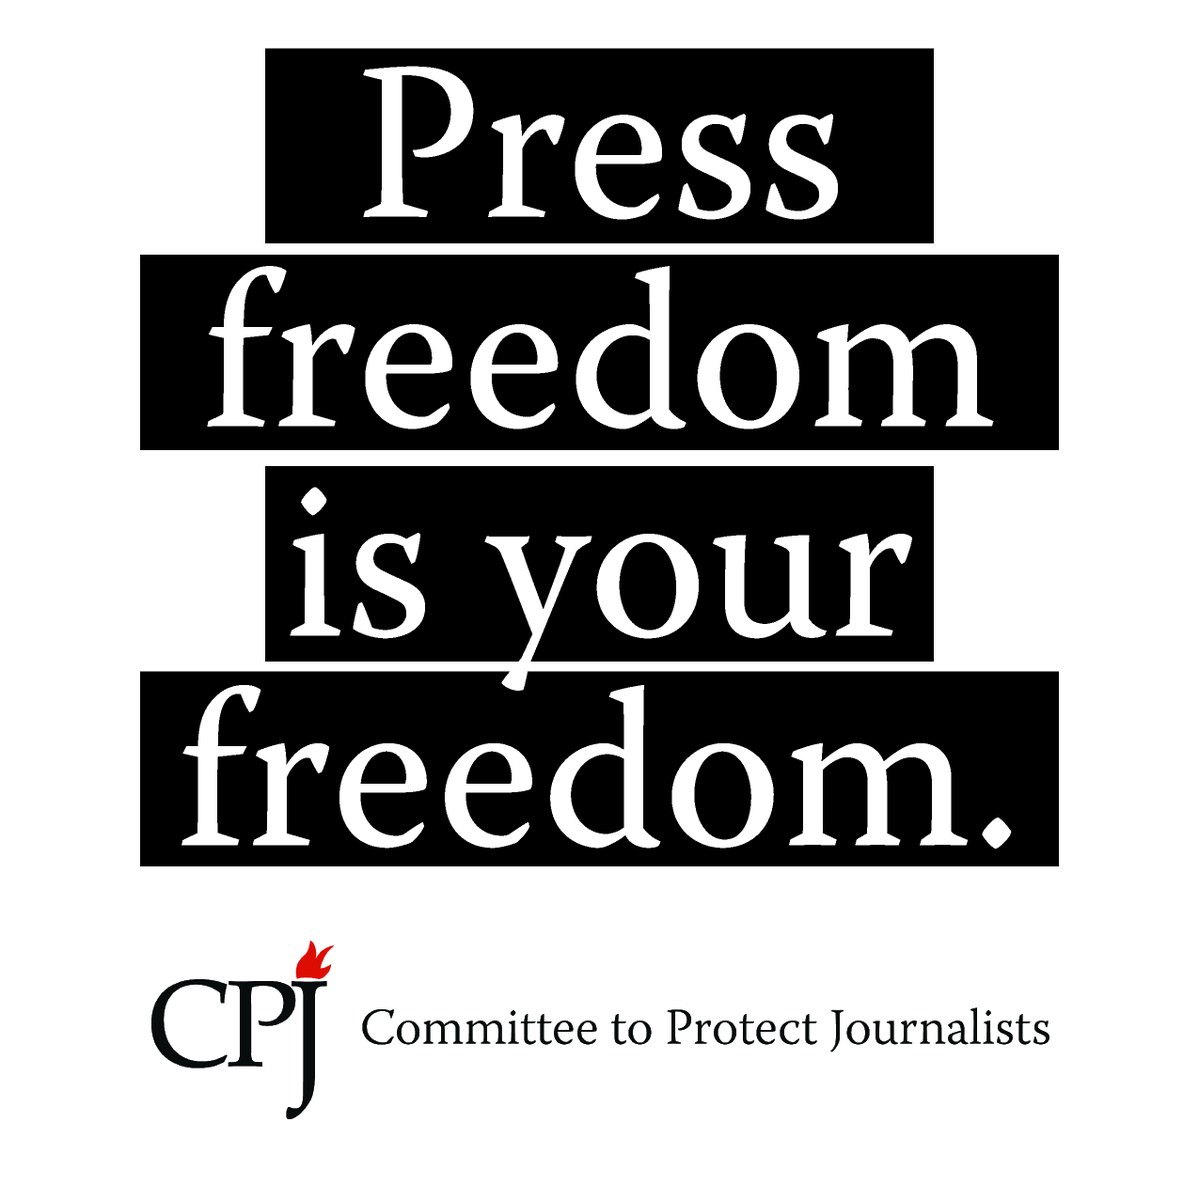 CPJ calls on governments to defend the centrality of press freedom and journalist safety in preserving and advancing democracy. 

#PressFreedomIsYourFreedom, and when the press is under attack, we are all at risk.

#Summit4Democracy #SummitForDemocracy